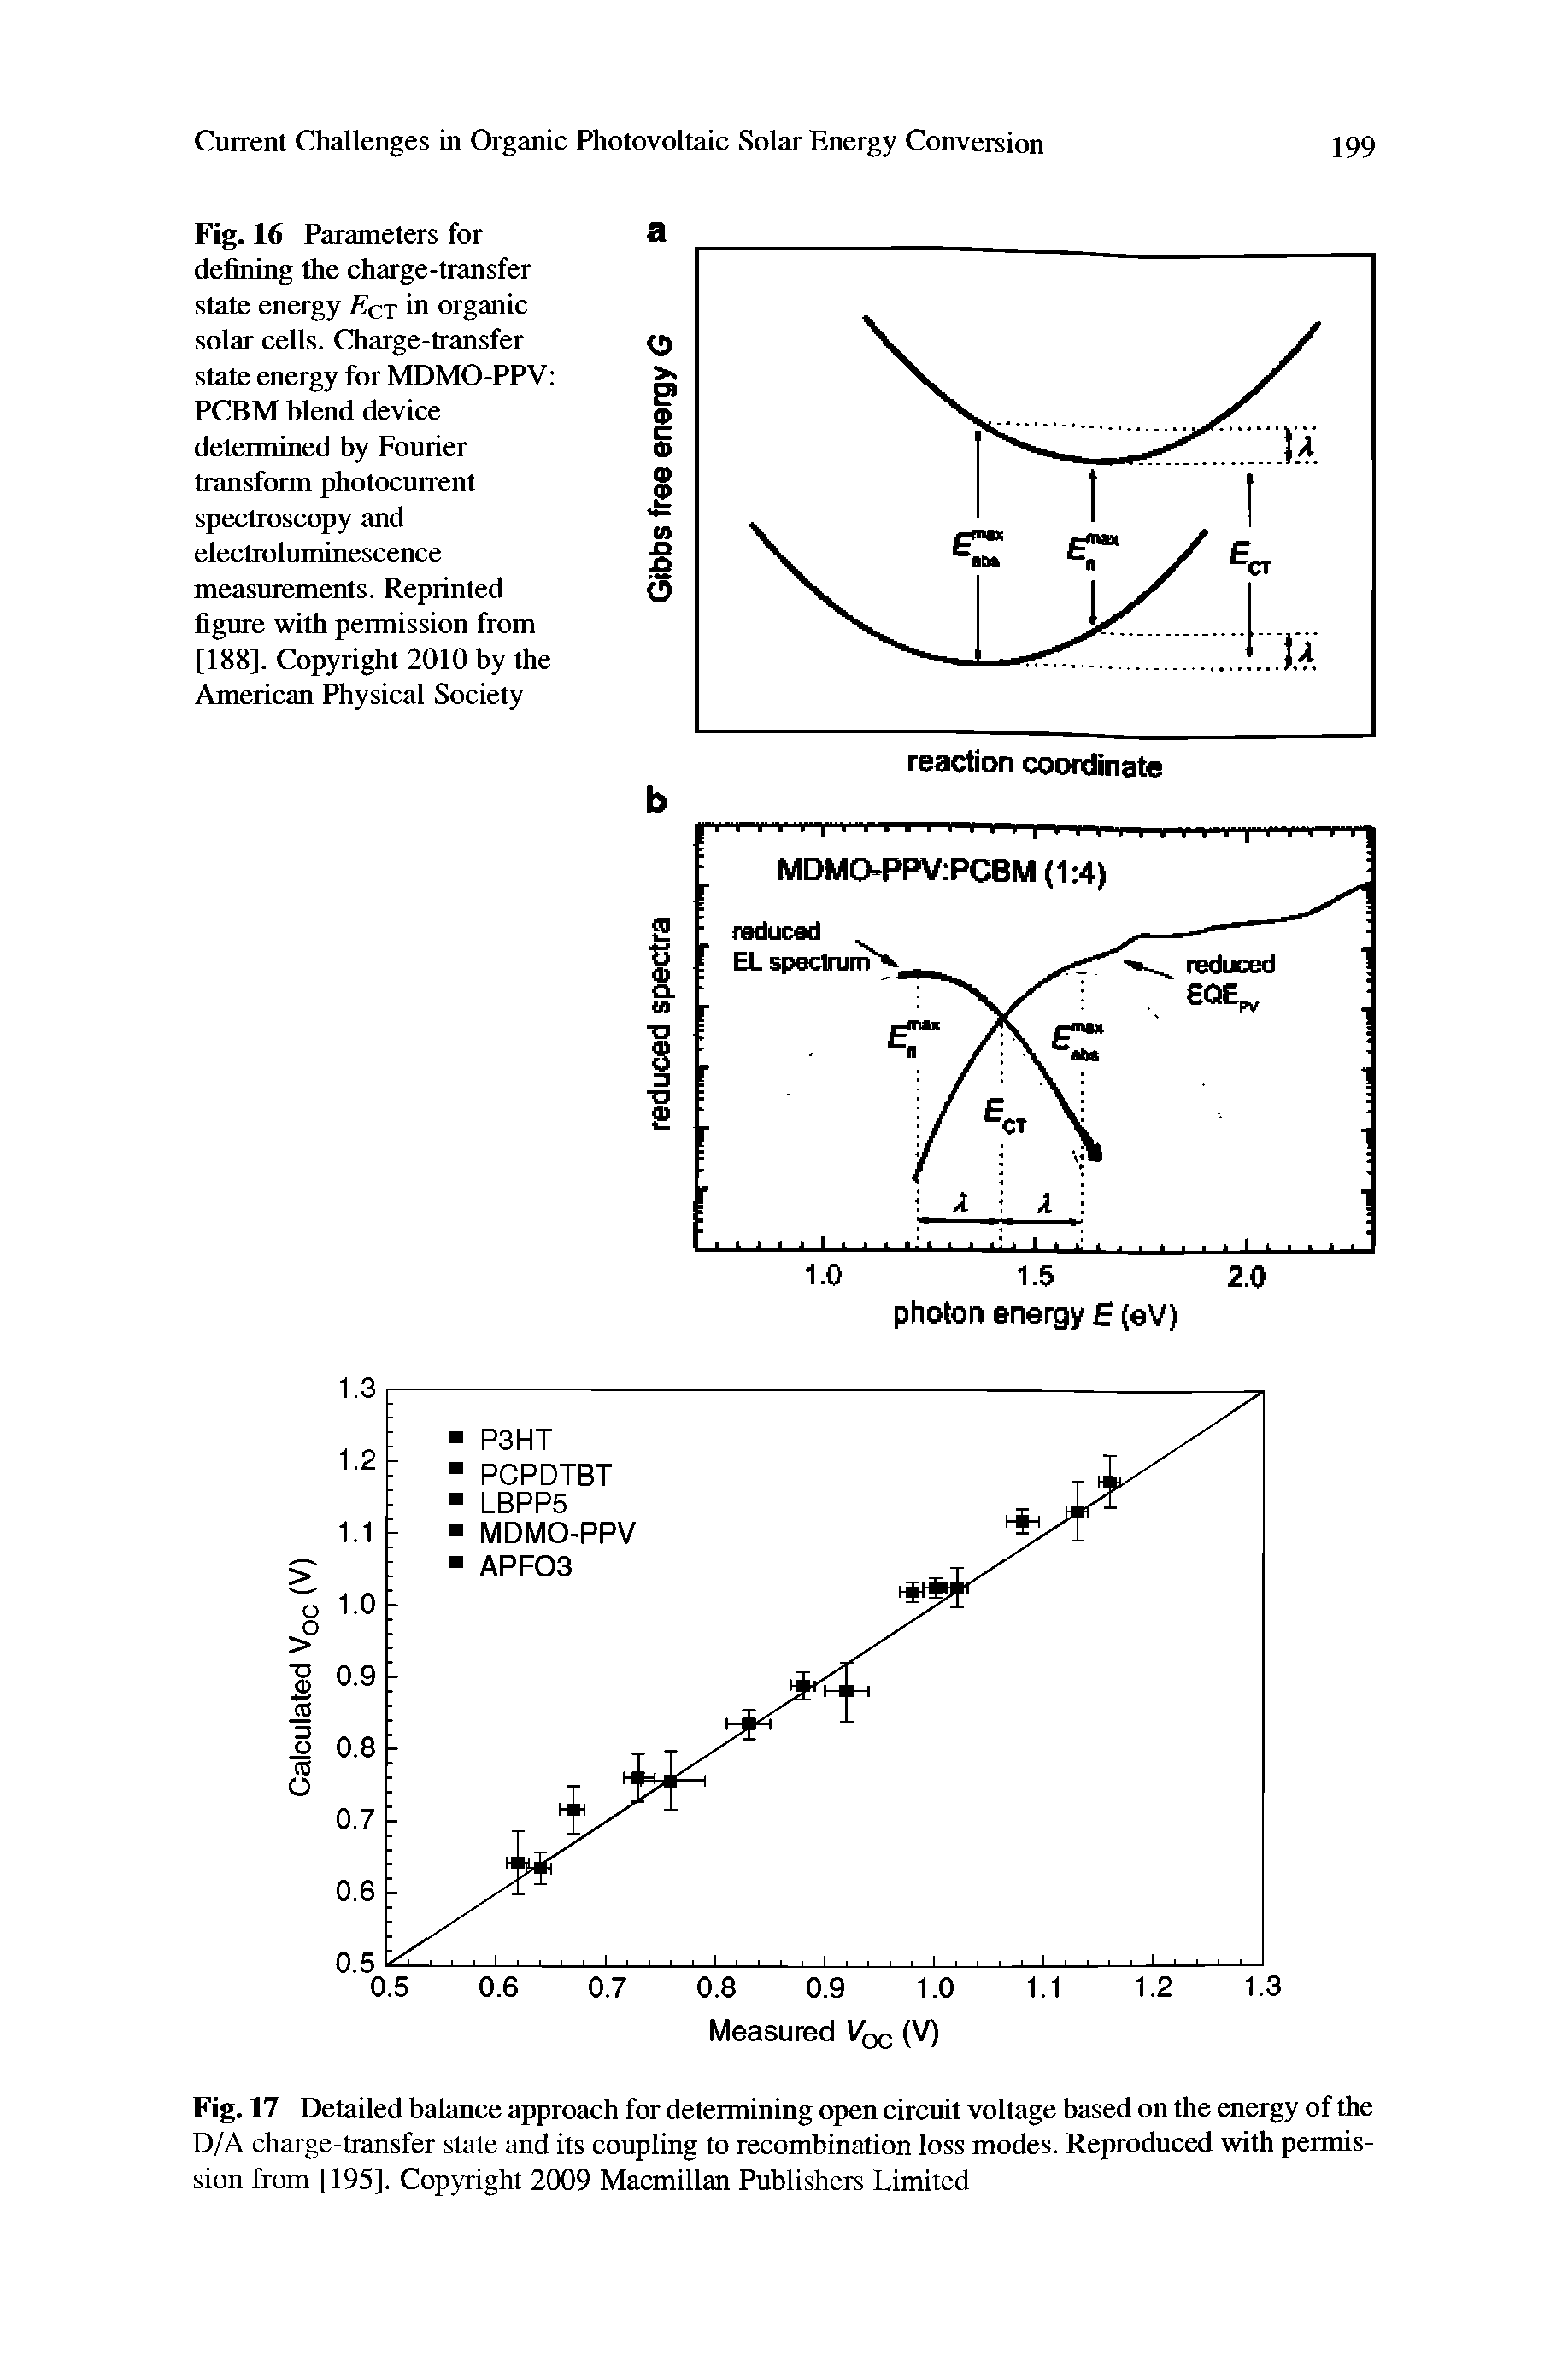 Fig. 17 Detailed balance approach for determining open circuit voltage based on the energy of the D/A charge-transfer state and its coupling to recombination loss modes. Reproduced with permission from [195]. Copyright 2009 Macmillan Publishers Limited...